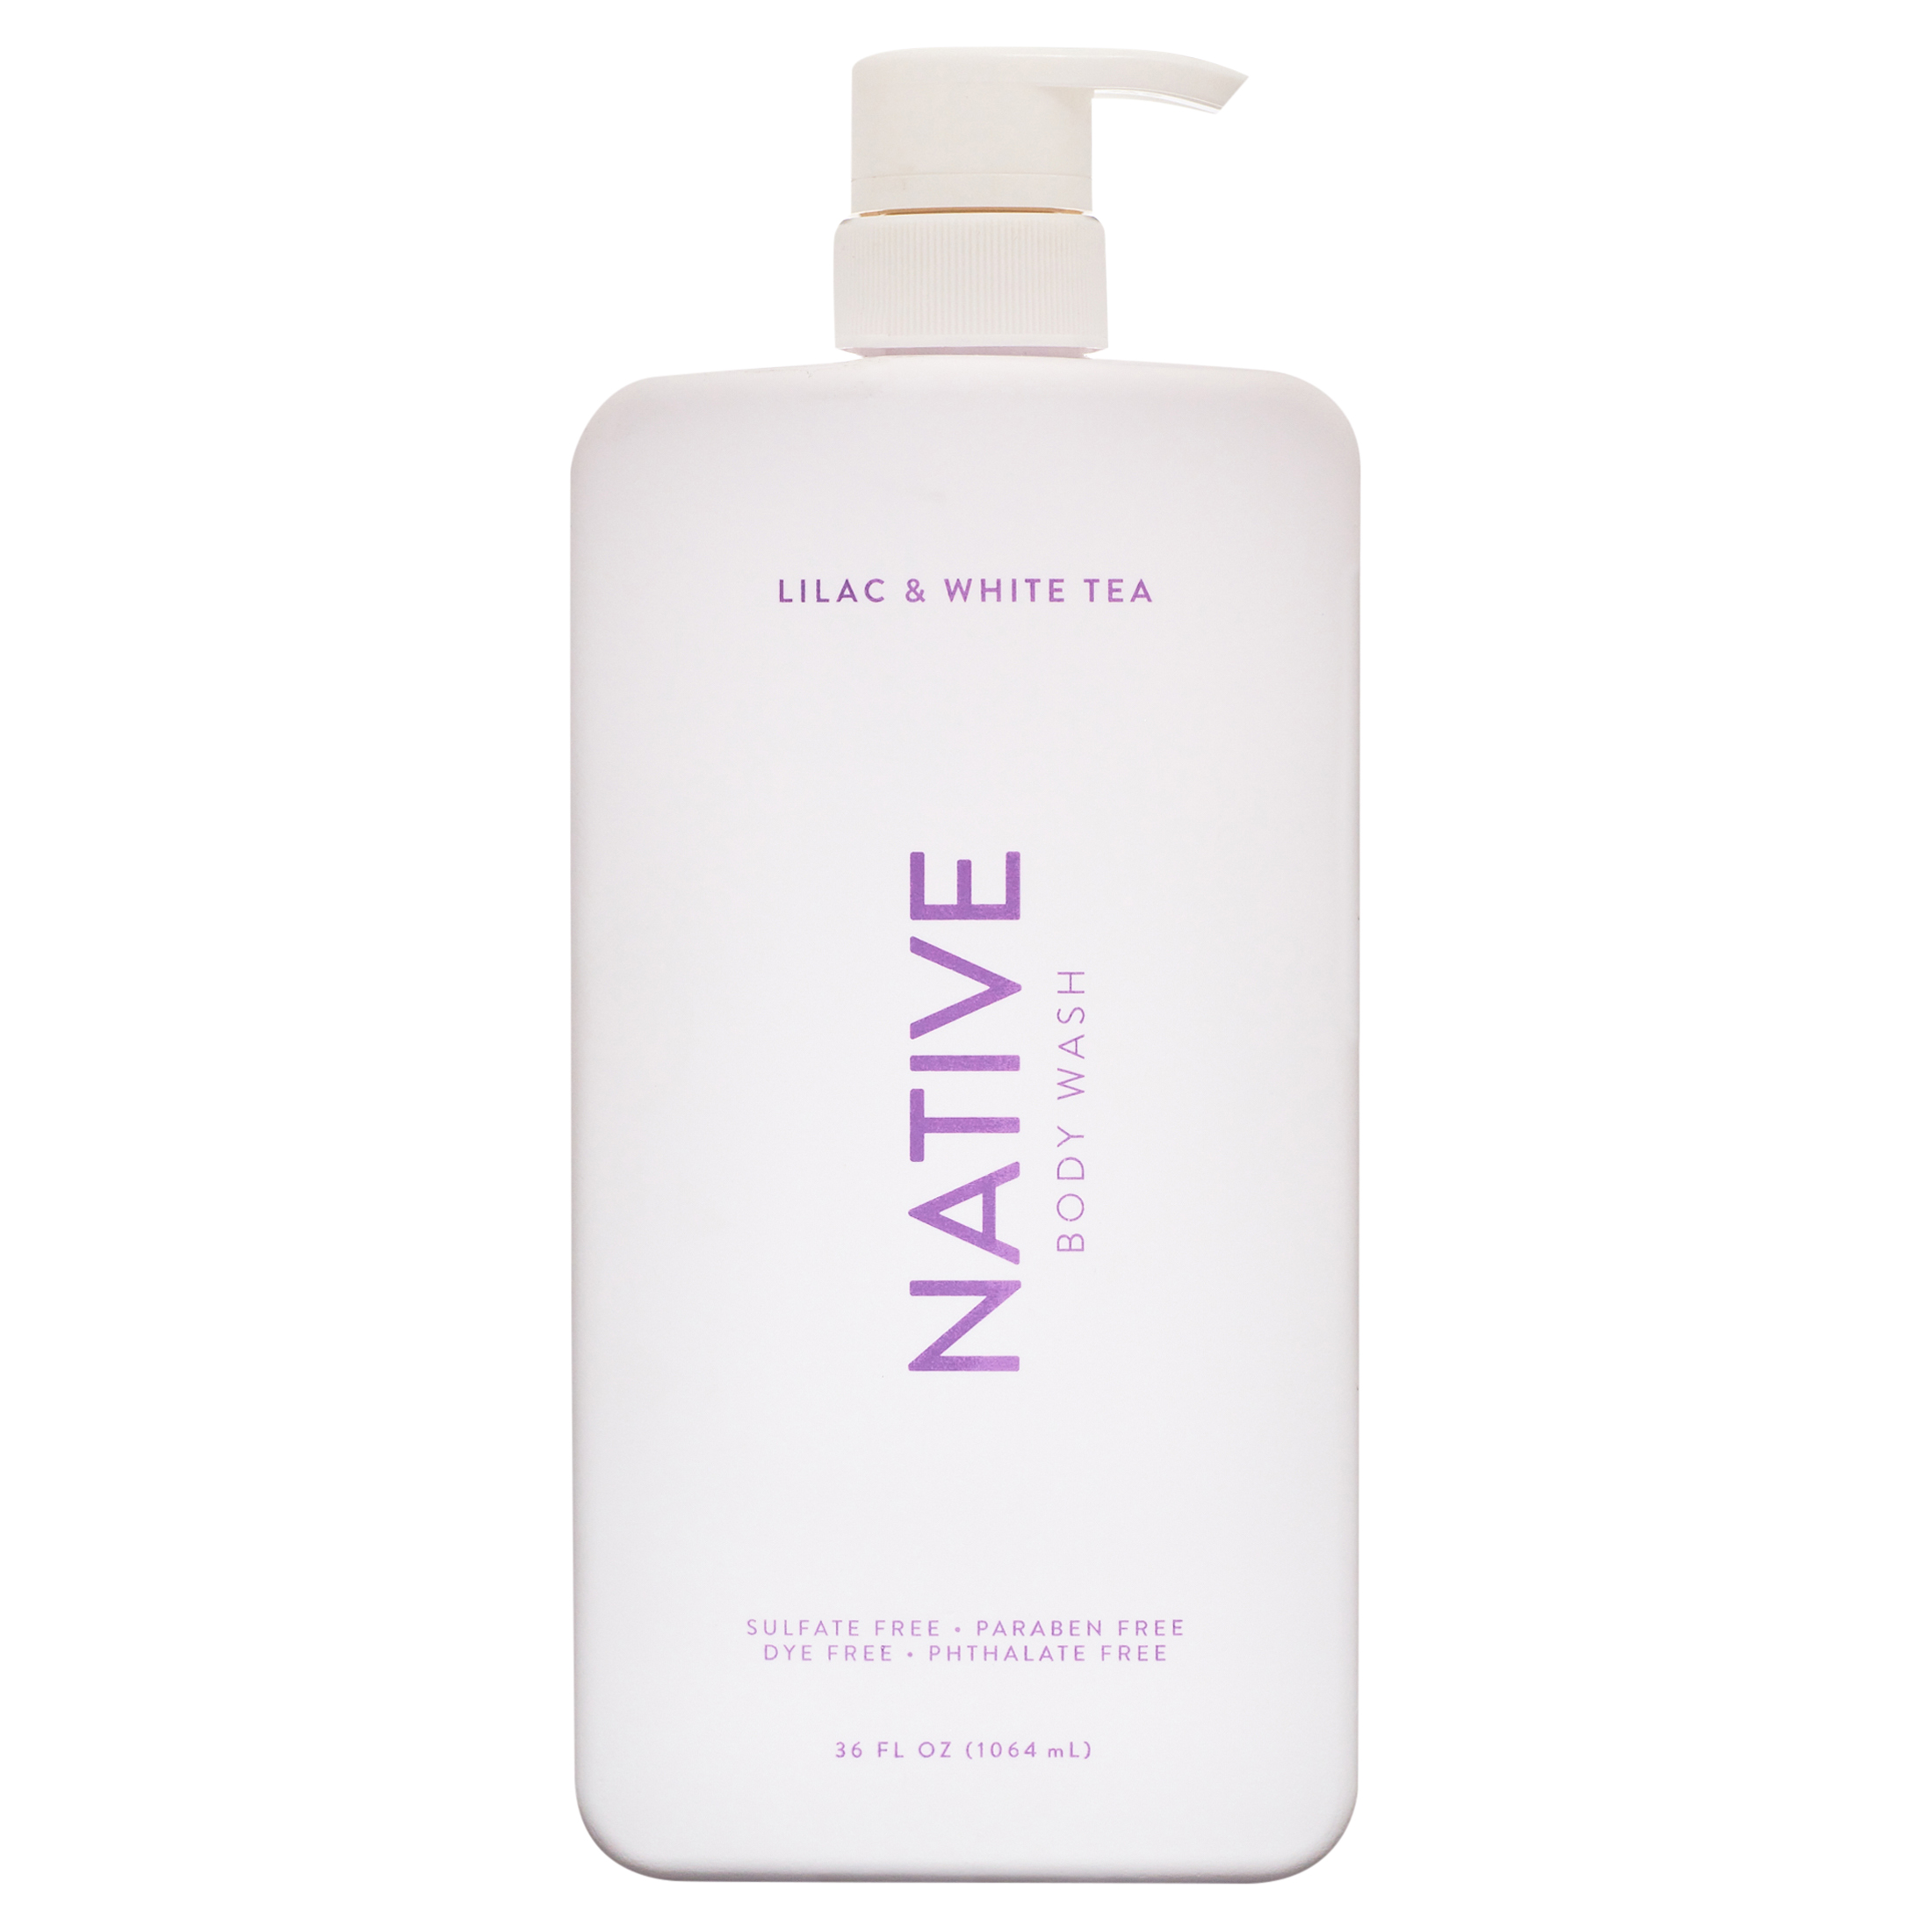 Native Body Wash Pump, Lilac & White Tea, Sulfate Free, Paraben Free, for Men and Women, 36 oz - image 1 of 6